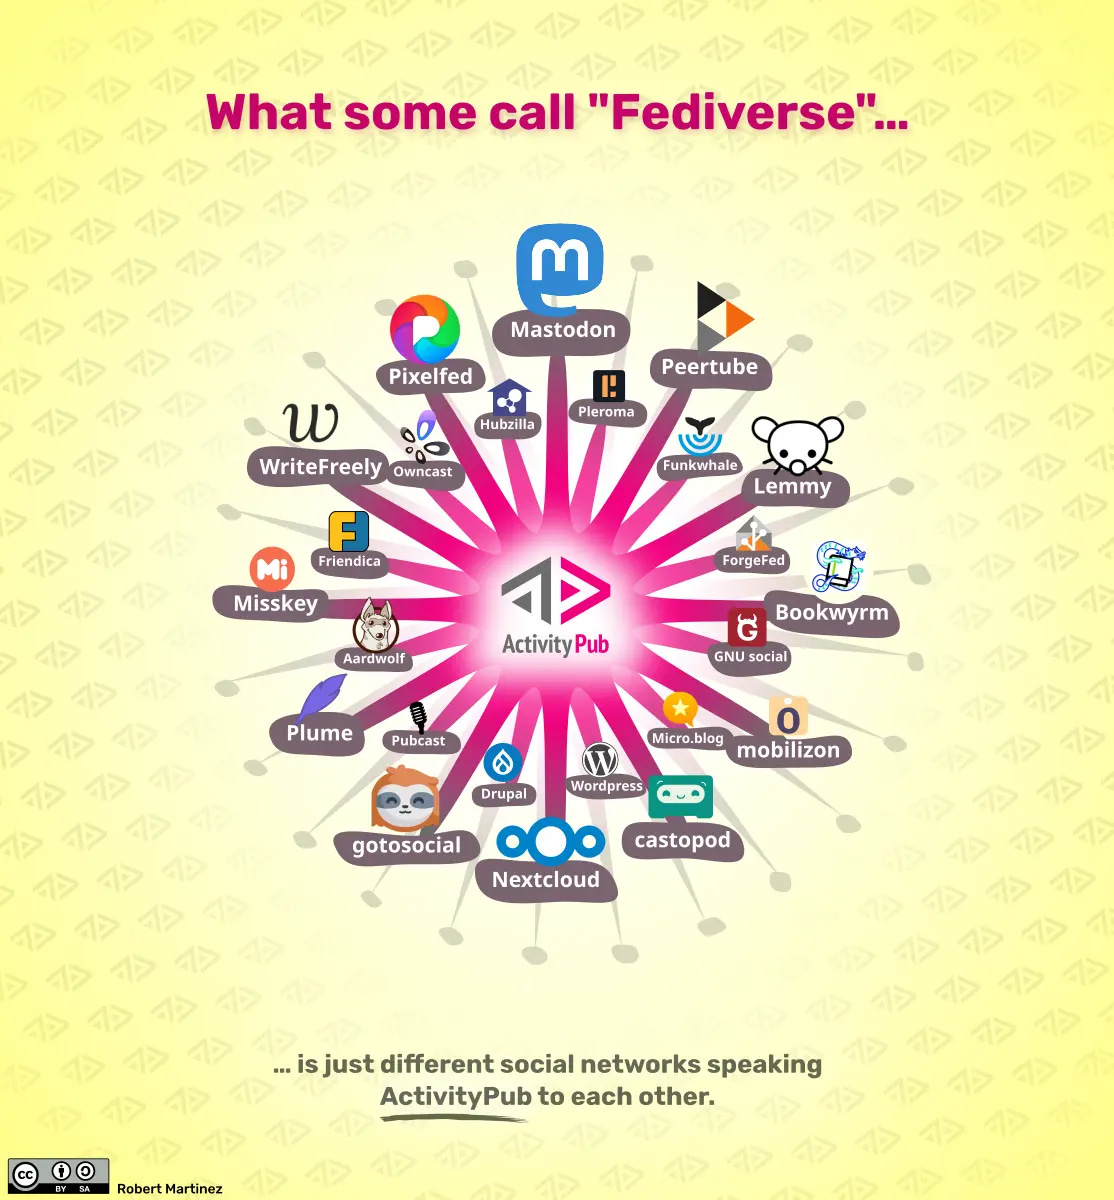 A 5-minute tour of the Fediverse | Opensource.com